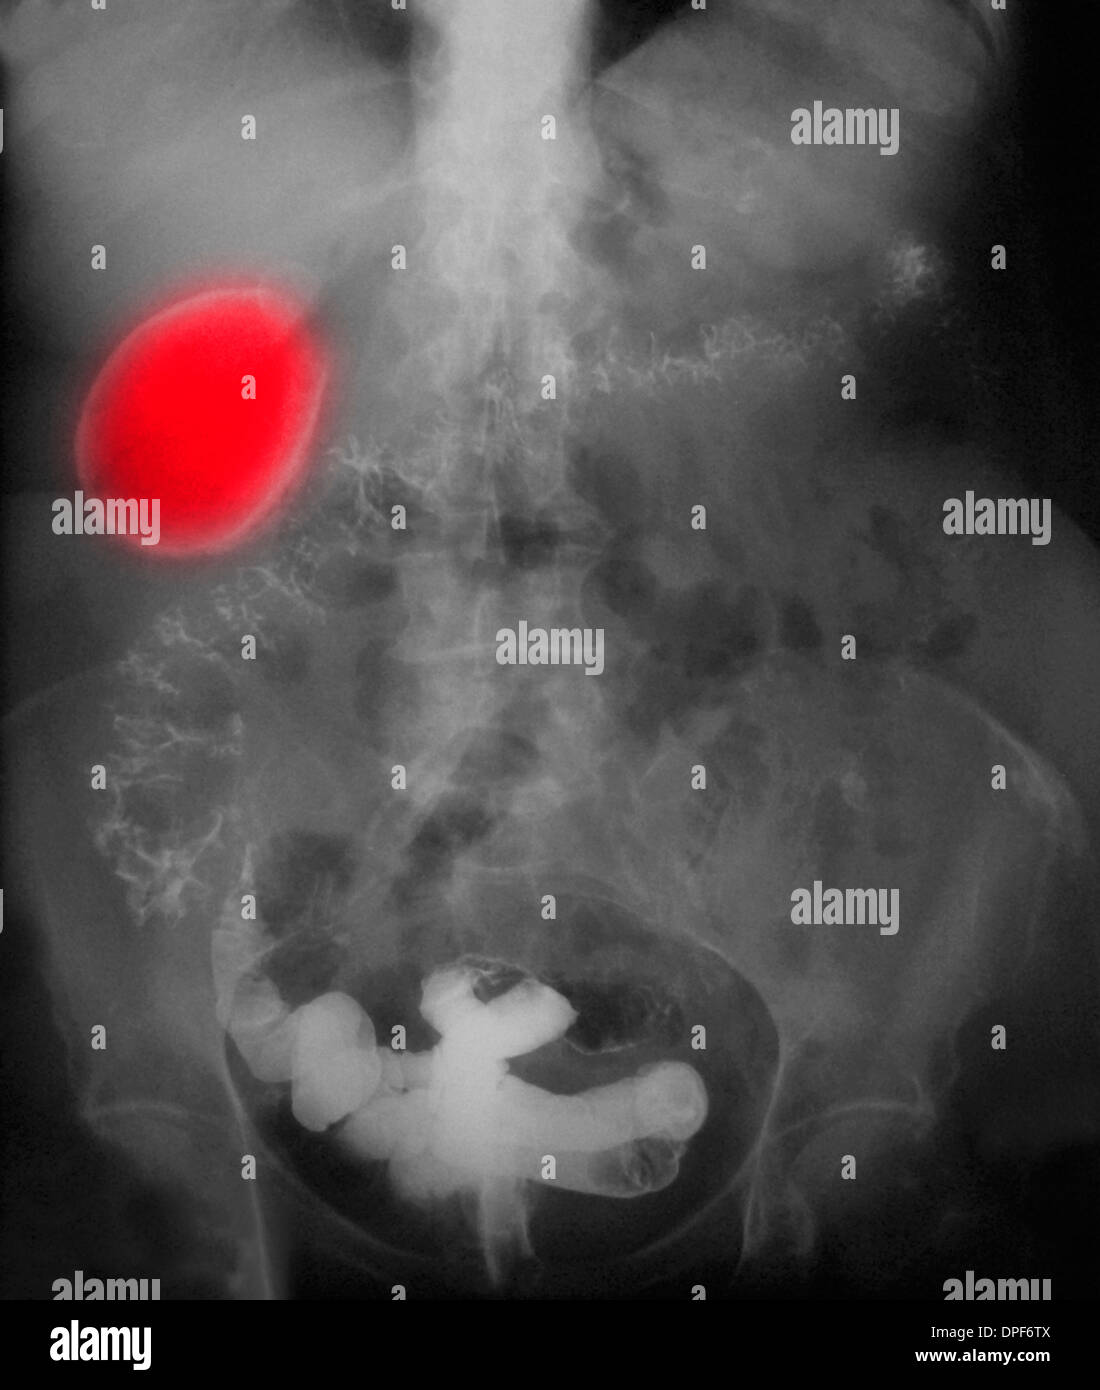 X-ray of abdomen showing porcelain gall bladder Stock Photo